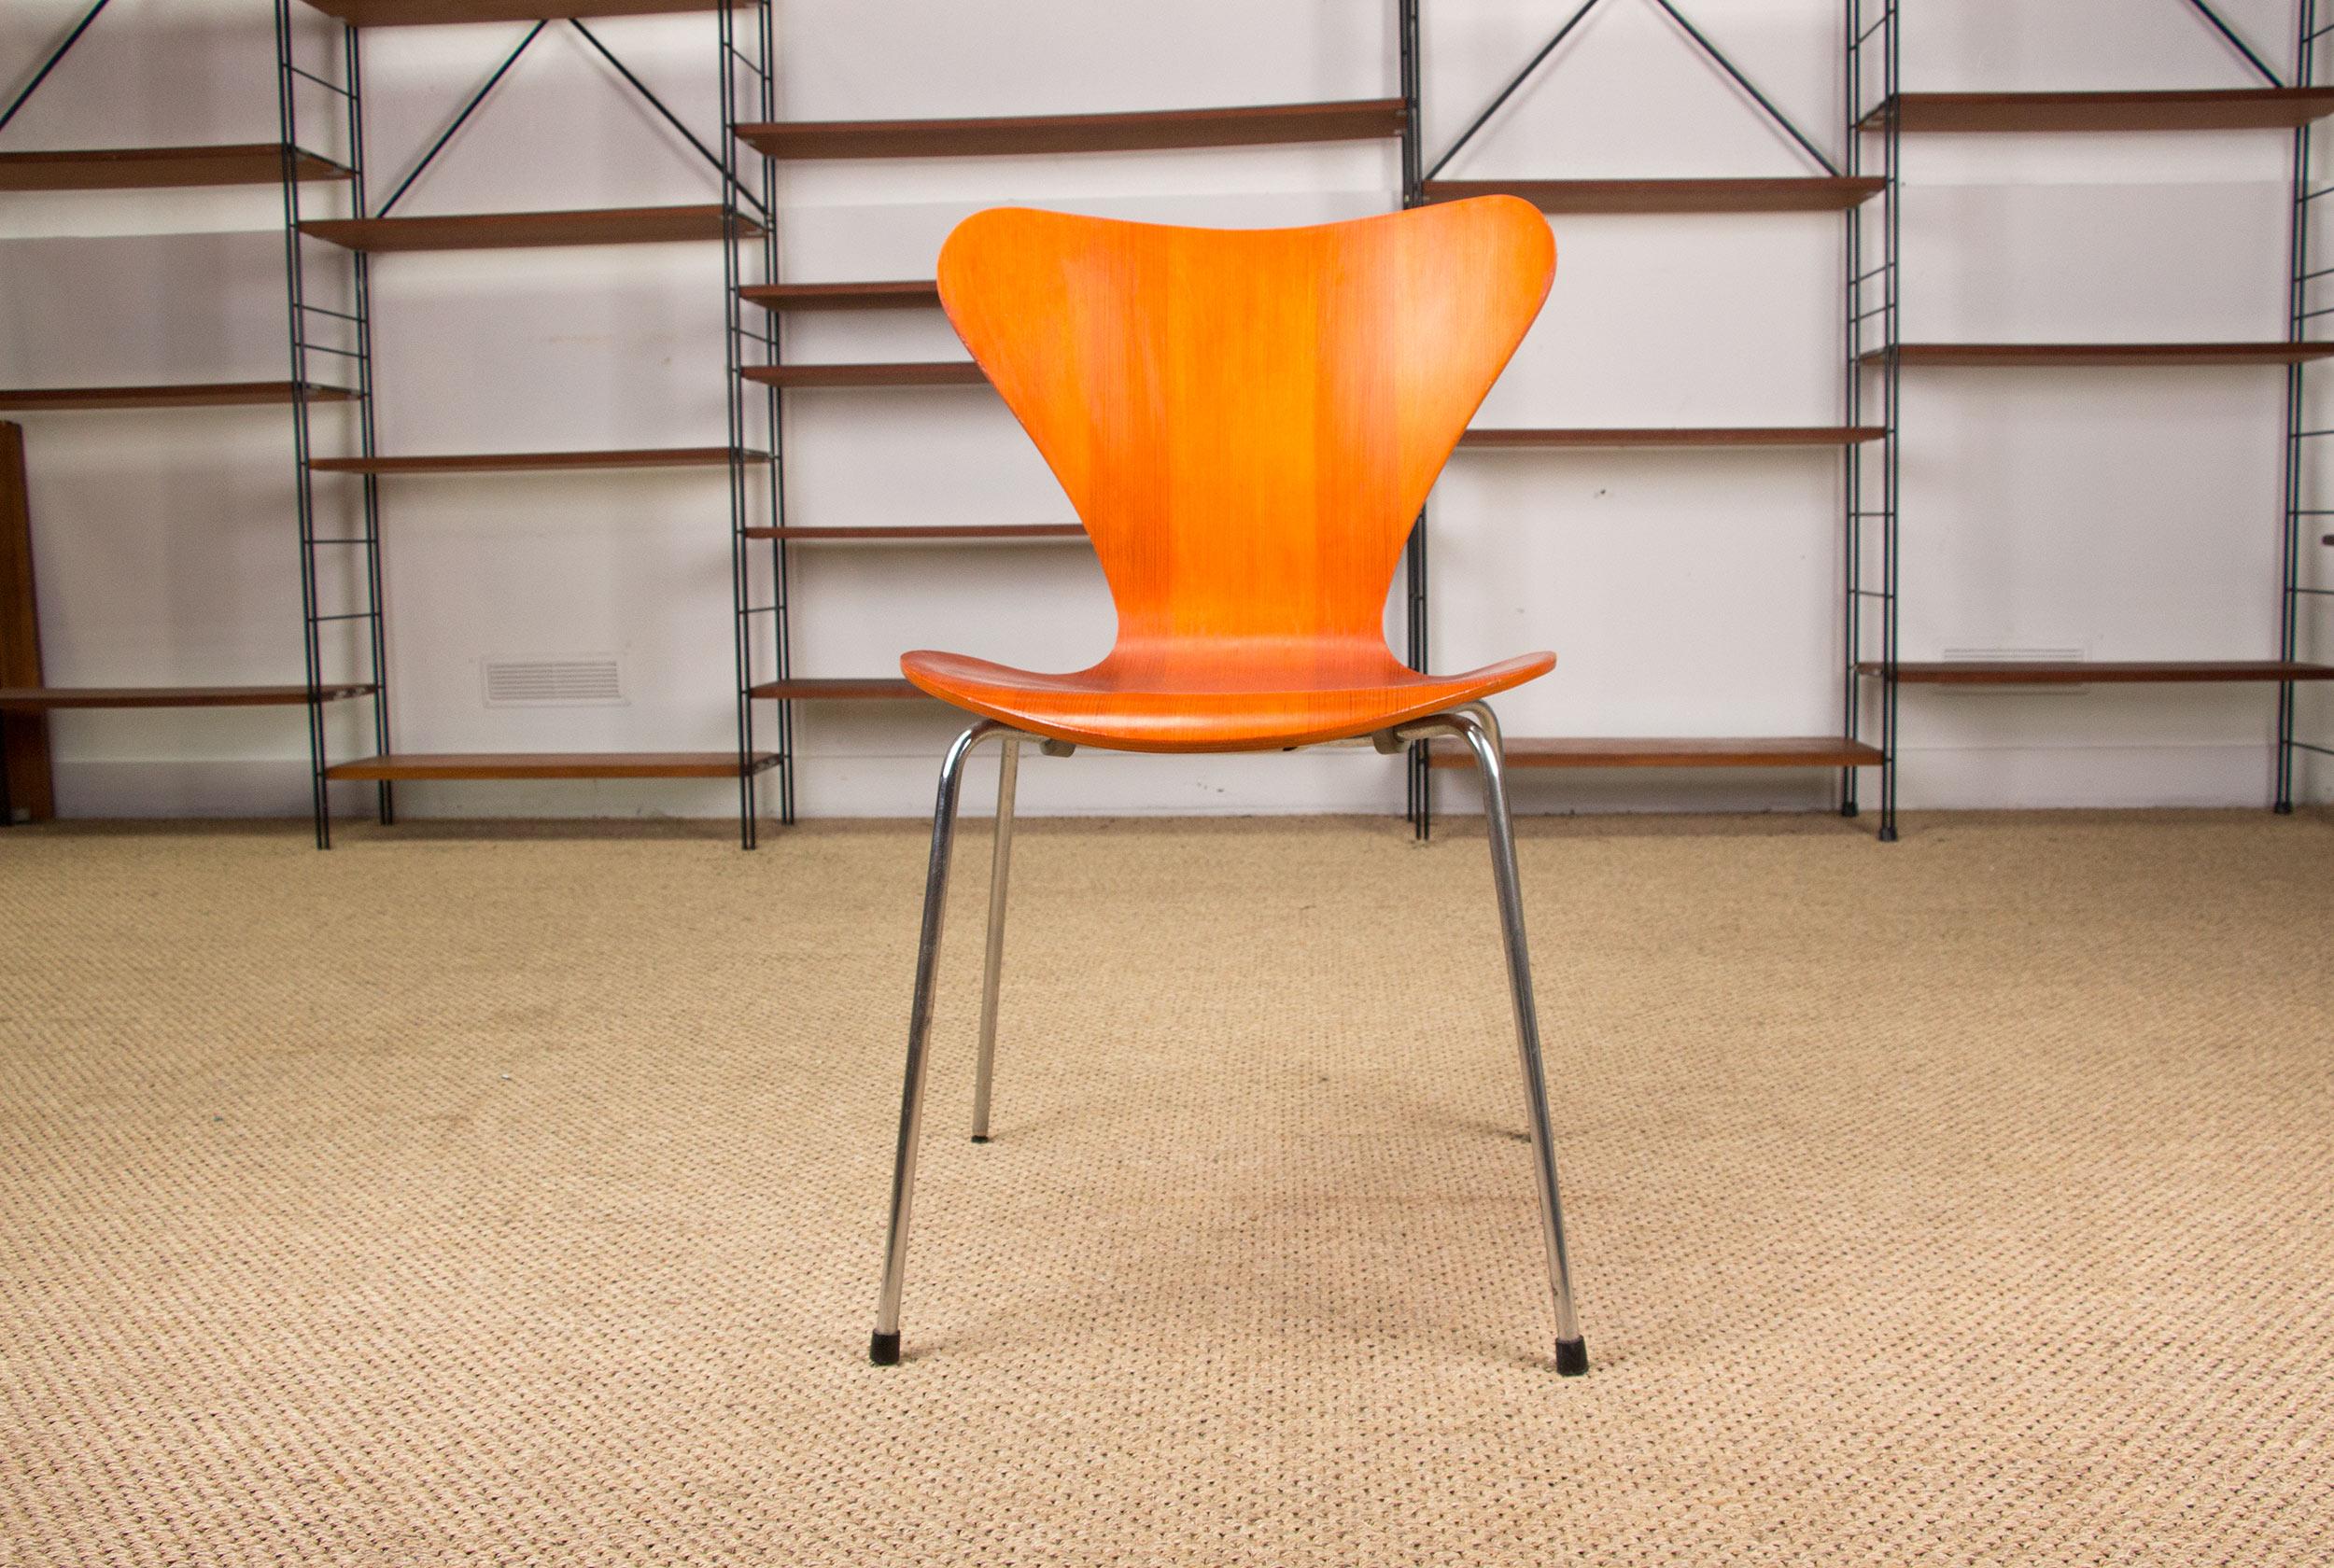 Iconic model of Danish Design, the Series 7 chair was designed in 1955 by Danish designer Arne Jacobsen. This piece is the culmination of Jacobsen's research into the possibilities offered by bentwood. This piece of furniture is still produced but